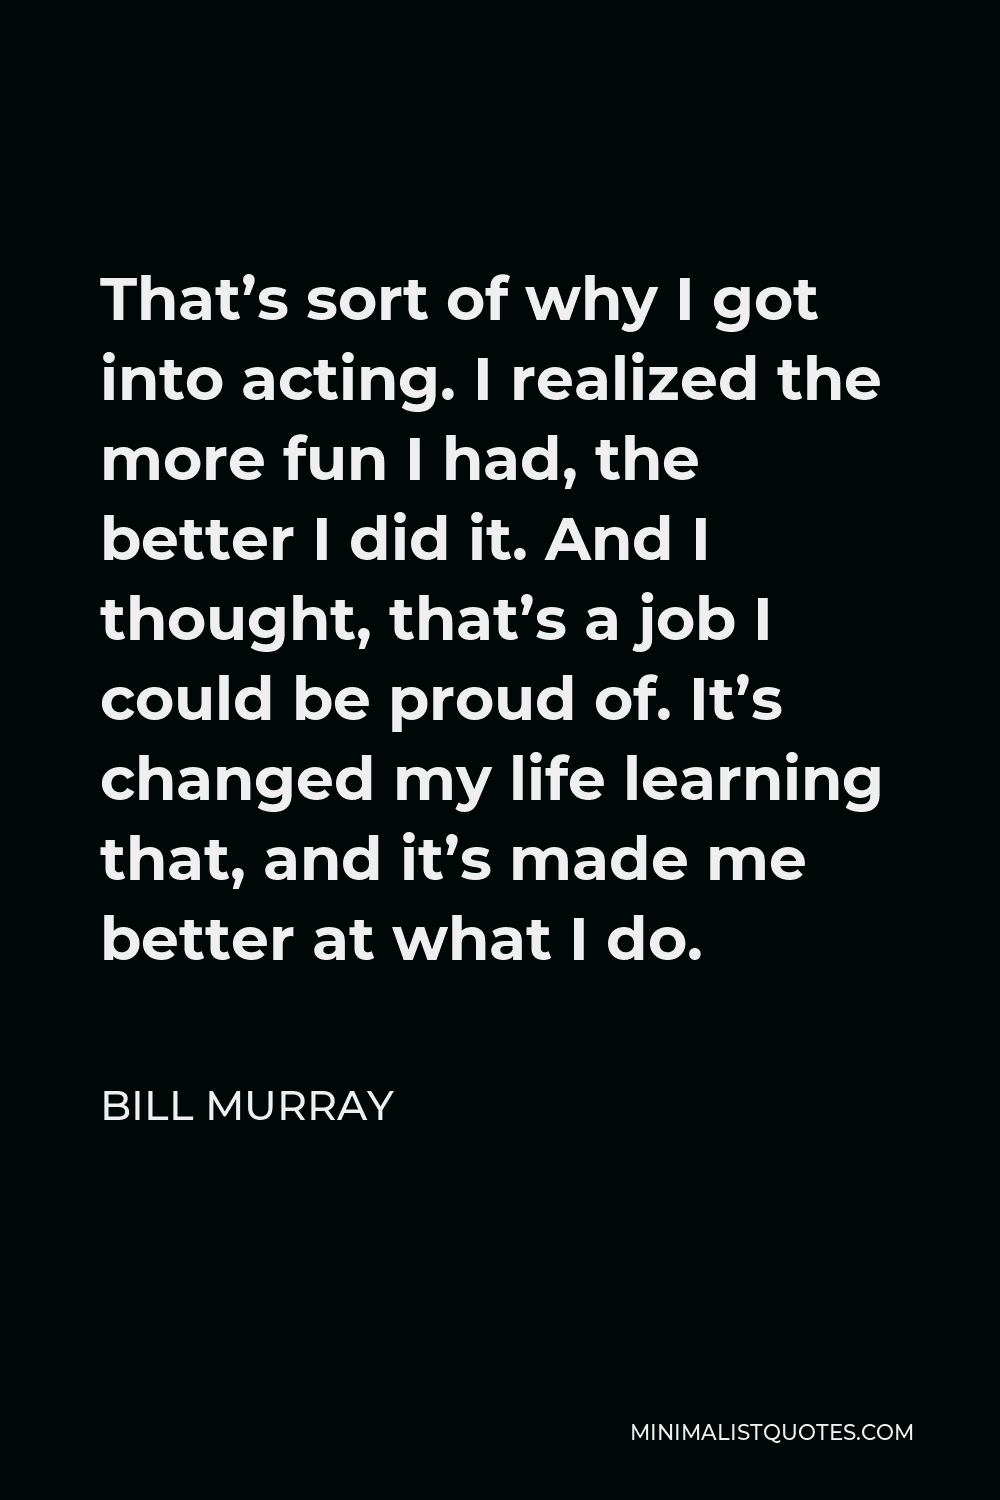 Bill Murray Quote - That’s sort of why I got into acting. I realized the more fun I had, the better I did it. And I thought, that’s a job I could be proud of. It’s changed my life learning that, and it’s made me better at what I do.